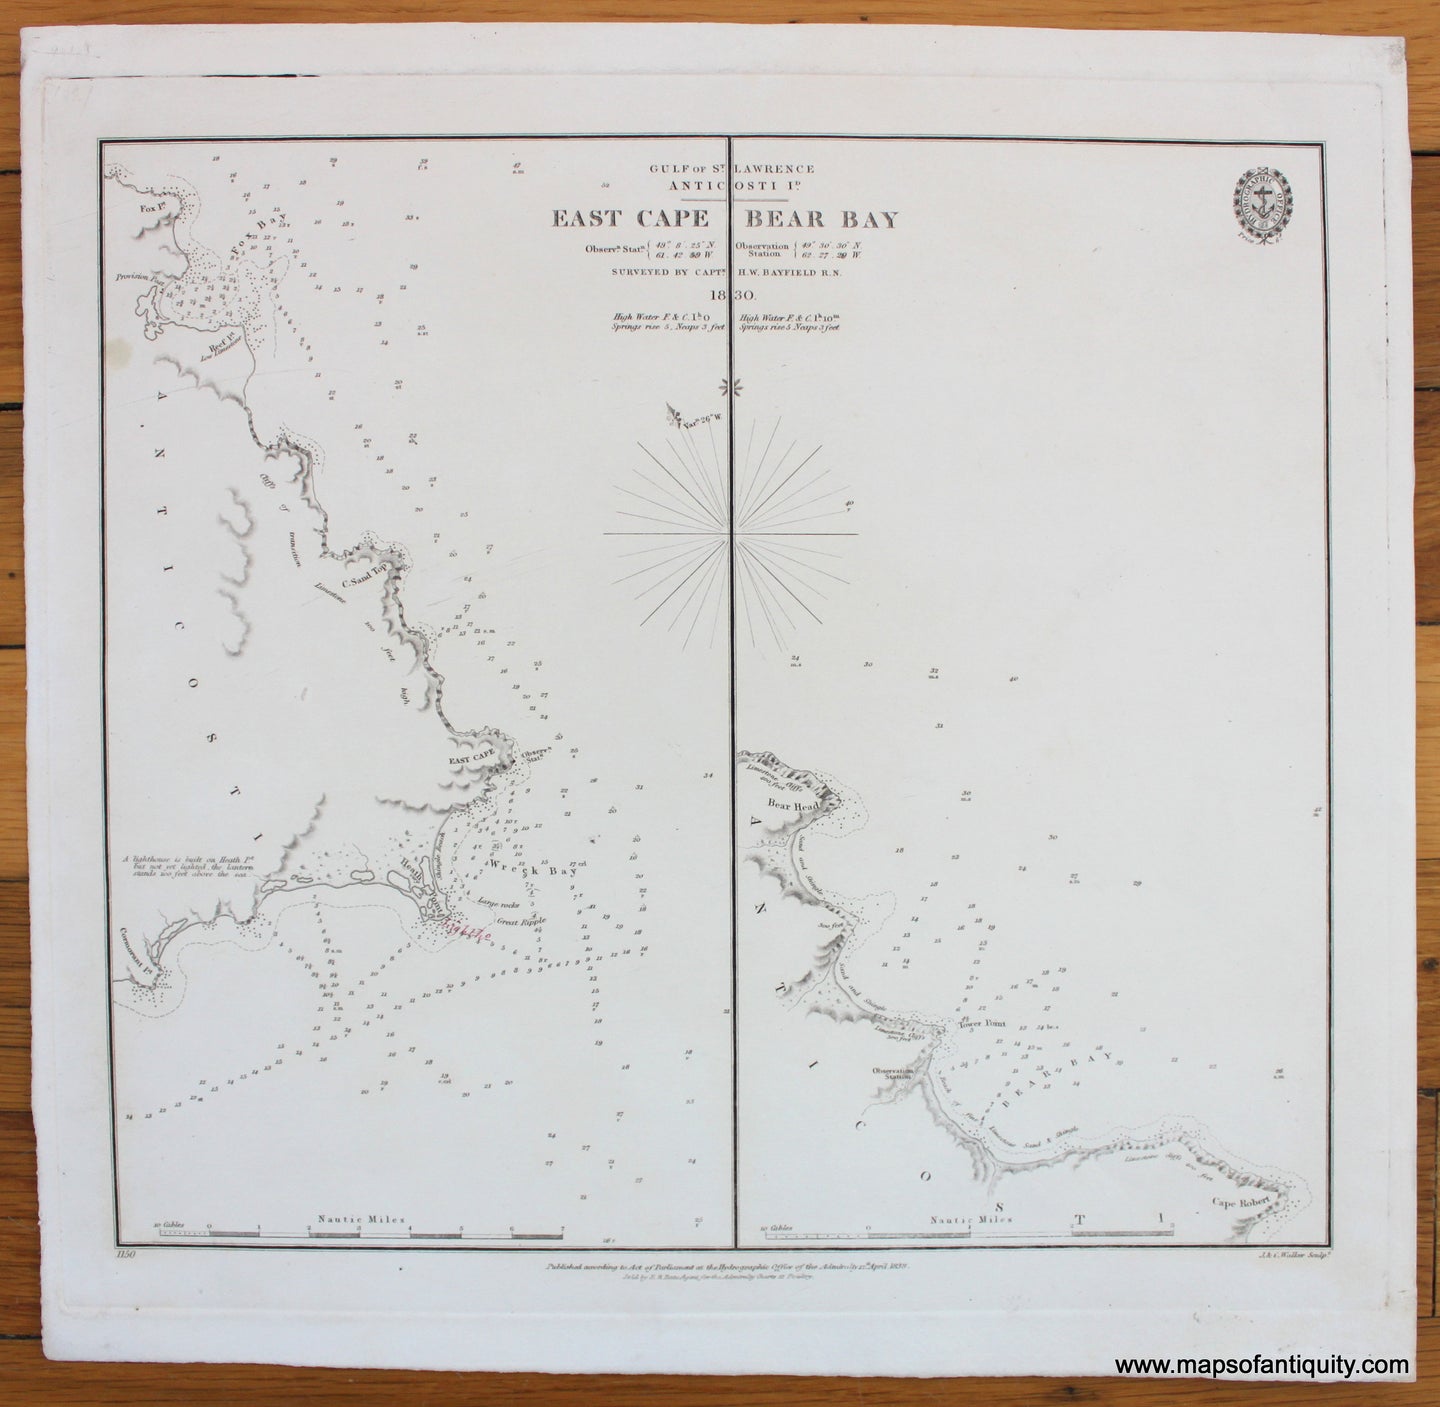 Antique-Map-Gulf-of-St.-Lawrence-Anticosti-Island-East-Cape-Bear-Bay-1830-1838-1830s-1800-Early-19th-Century-Maps-of-Antiquity